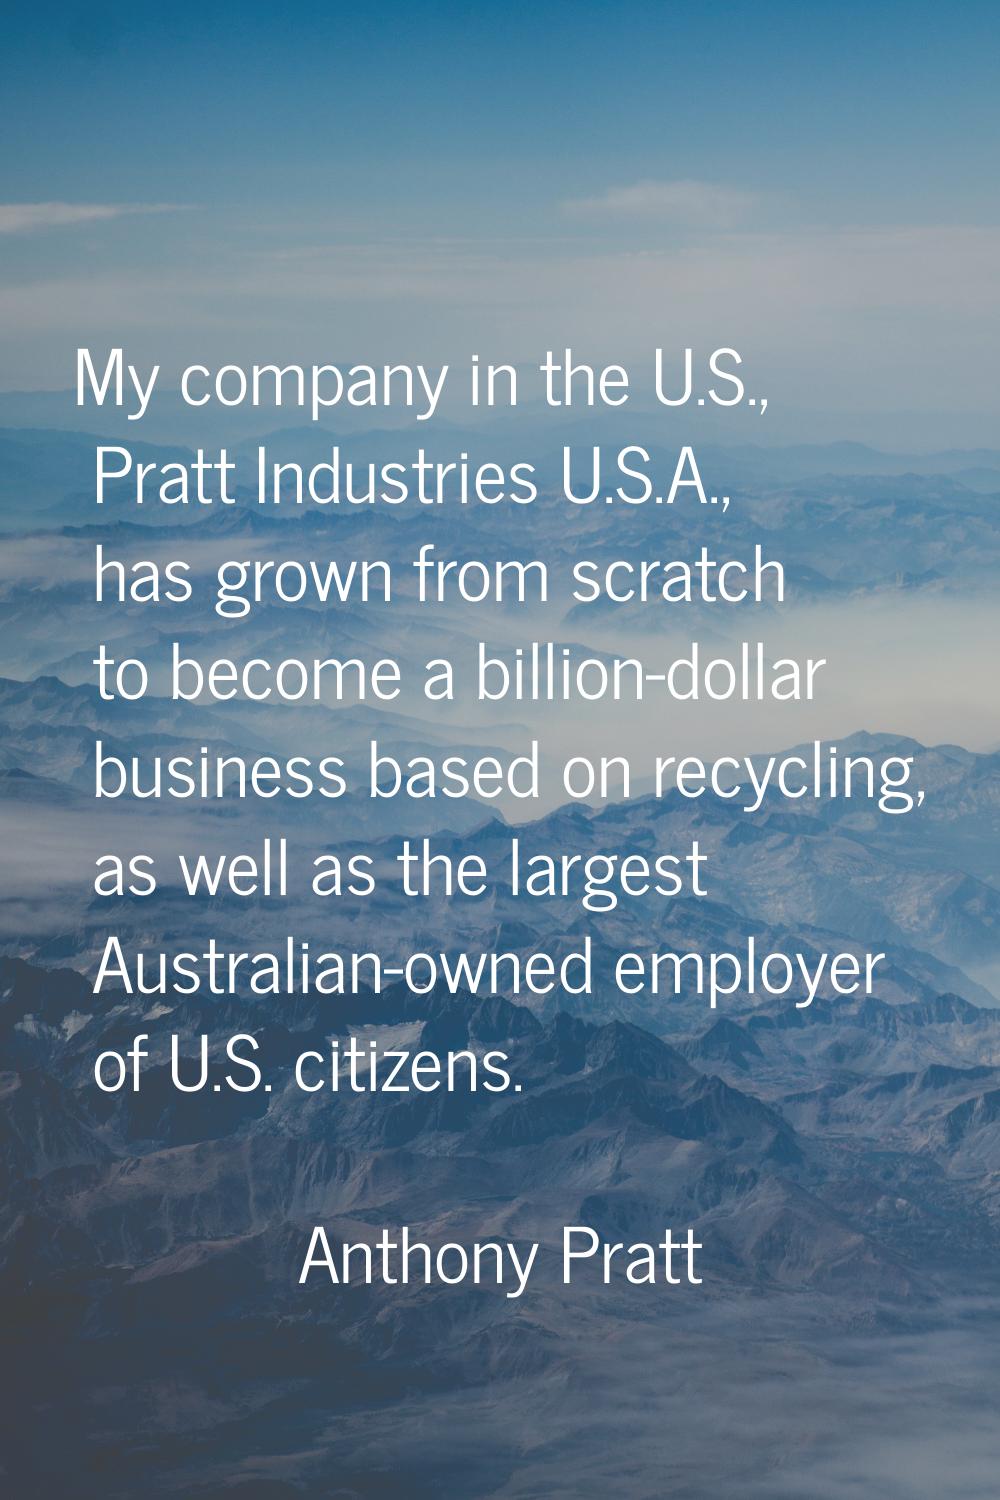 My company in the U.S., Pratt Industries U.S.A., has grown from scratch to become a billion-dollar 